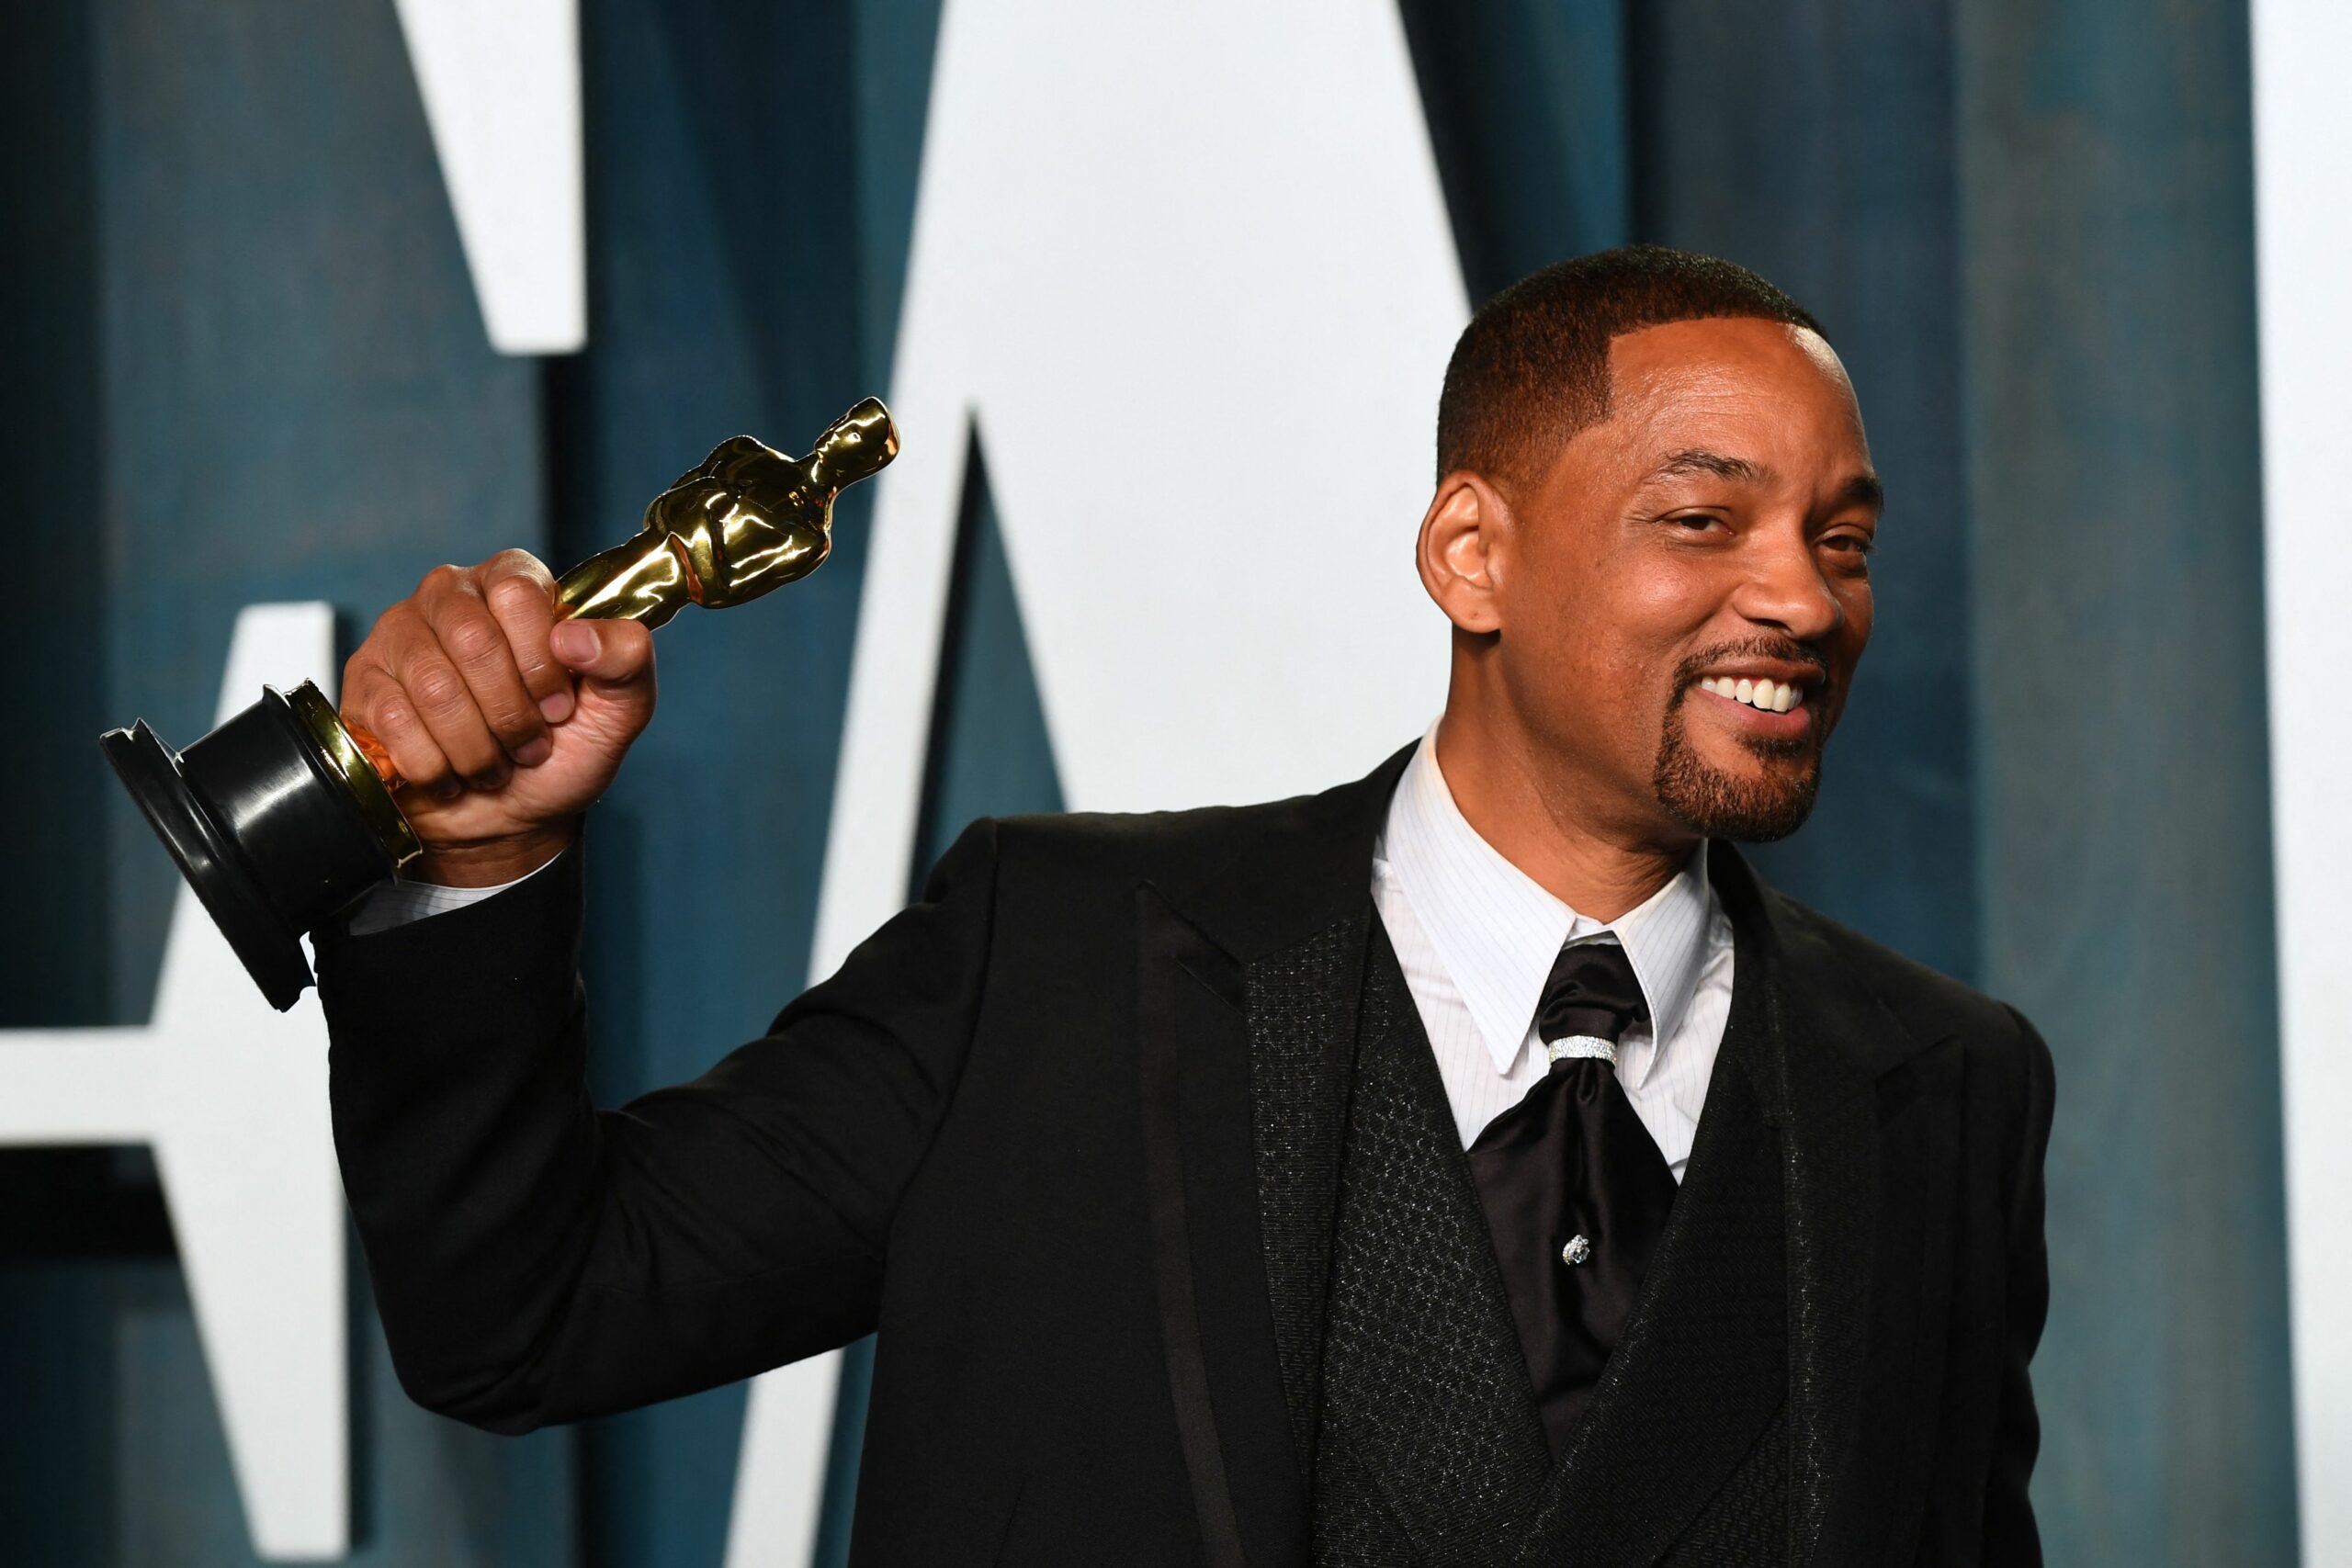 Actor Will Smith holds his award for Best Actor in a Leading Role for "King Richard" as he attends the 2022 Vanity Fair Oscar Party following the 94th Oscars at the The Wallis Annenberg Center for the Performing Arts in Beverly Hills, California on March 27, 2022. Photo by PATRICK T. FALLON/AFP via Getty Images